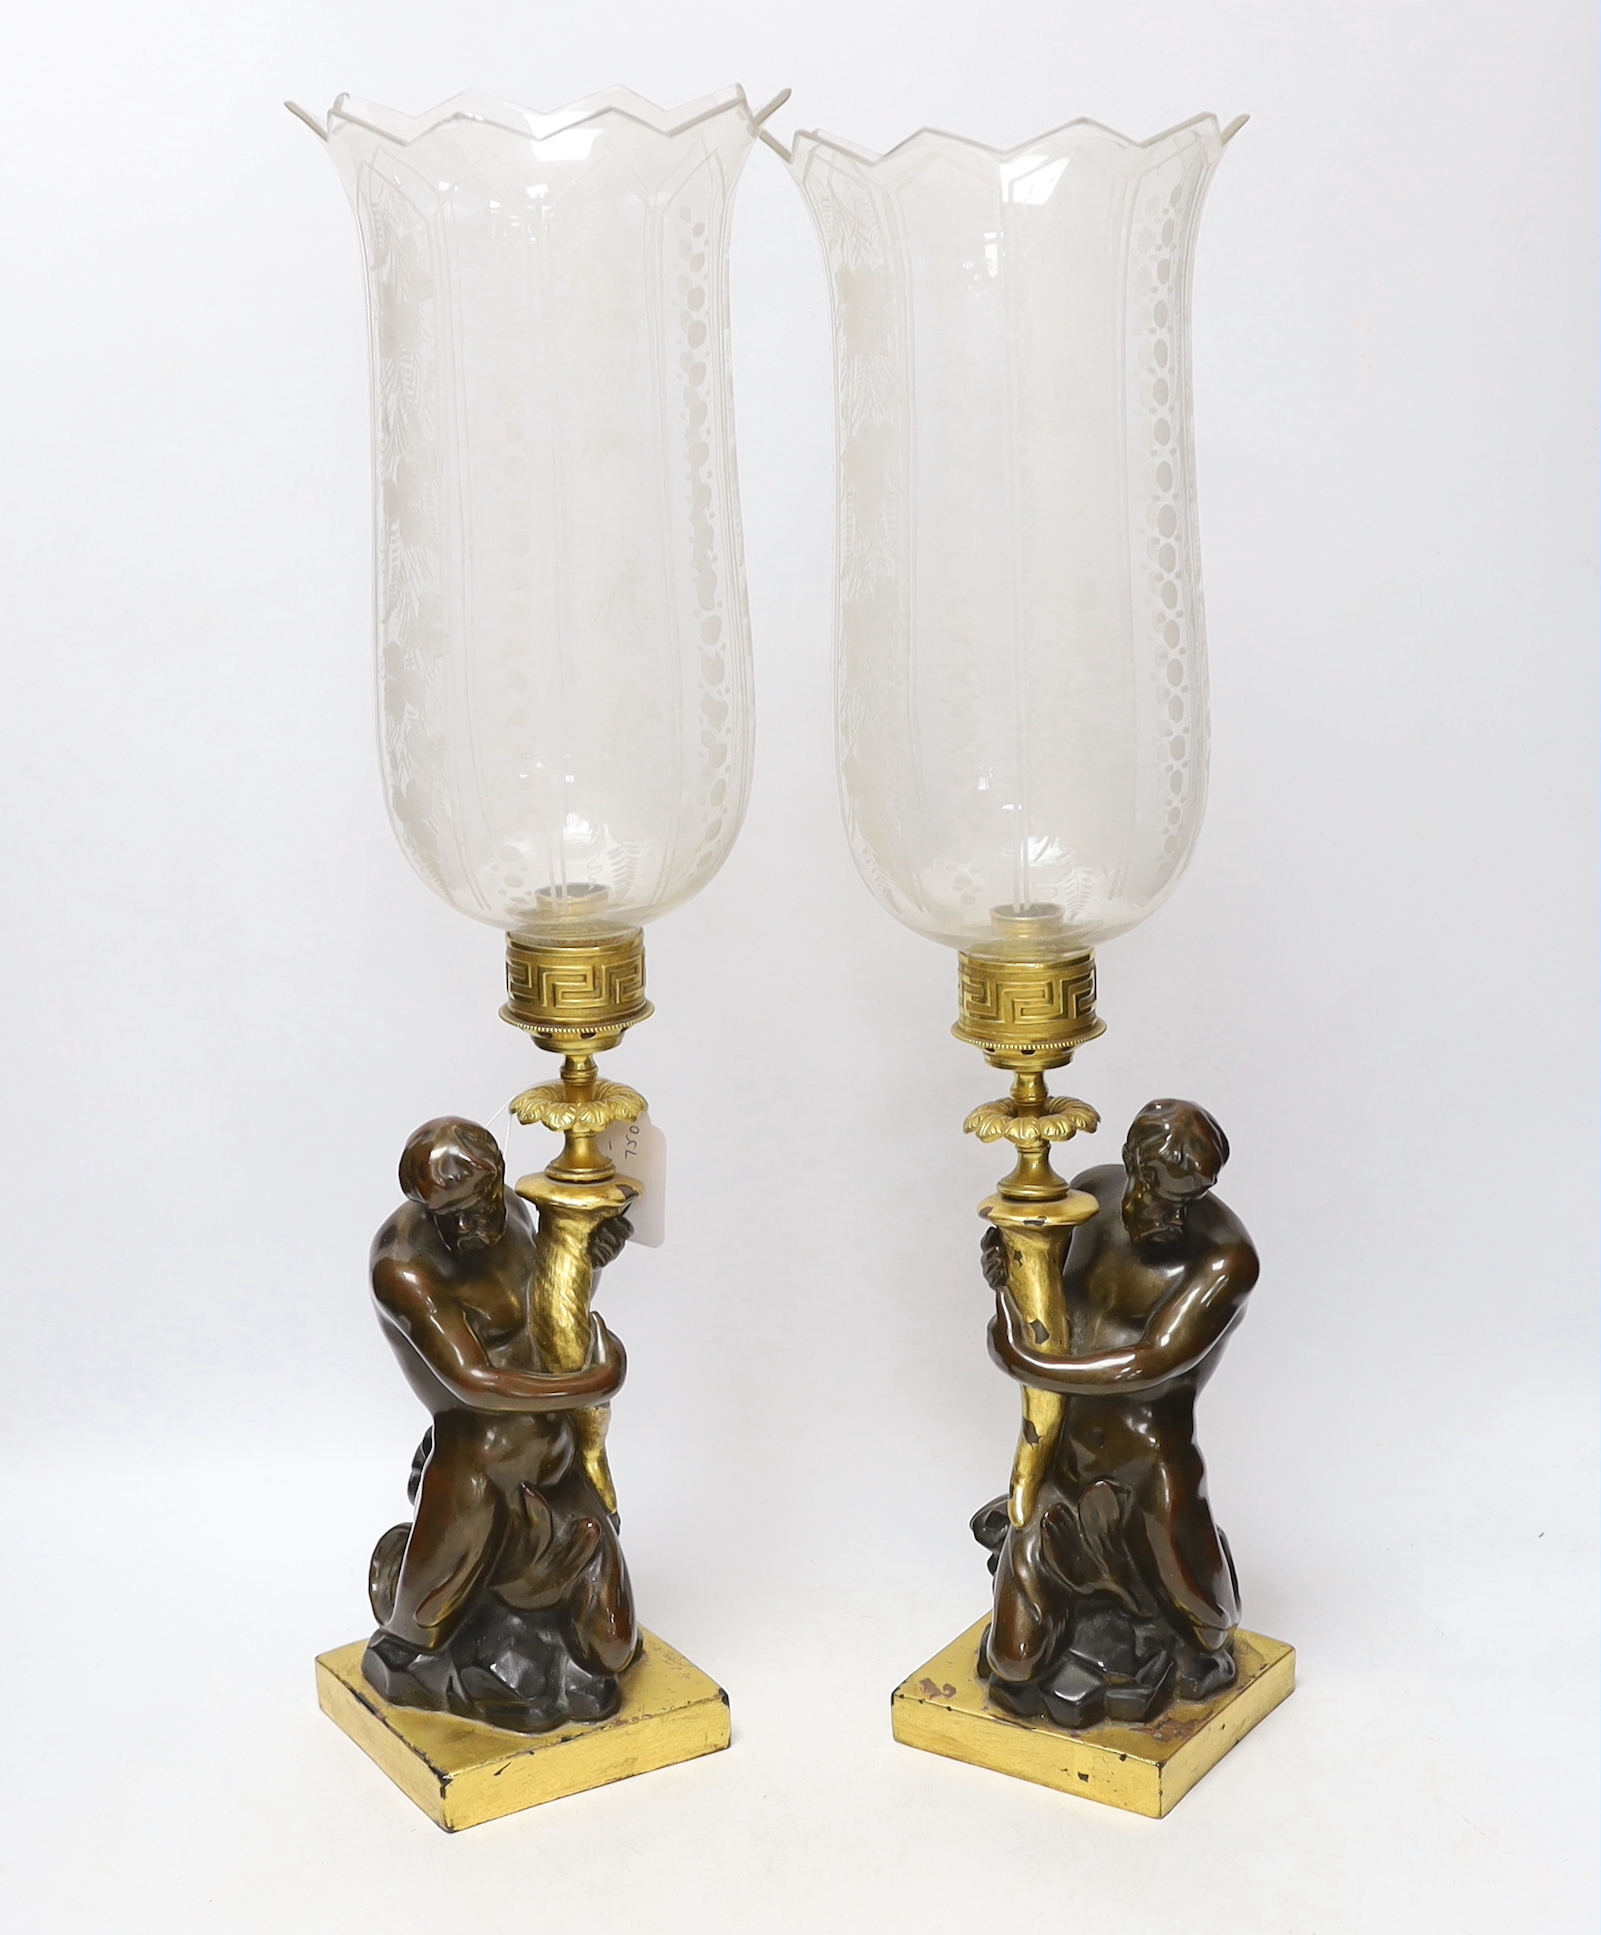 A pair of 19th century bronzed stoneware candlesticks, after a design by John Flaxman, each modelled as a triton holding a cornucopia, supporting a gilt brass sconce and engraved glass hurricane shade, 54cm high